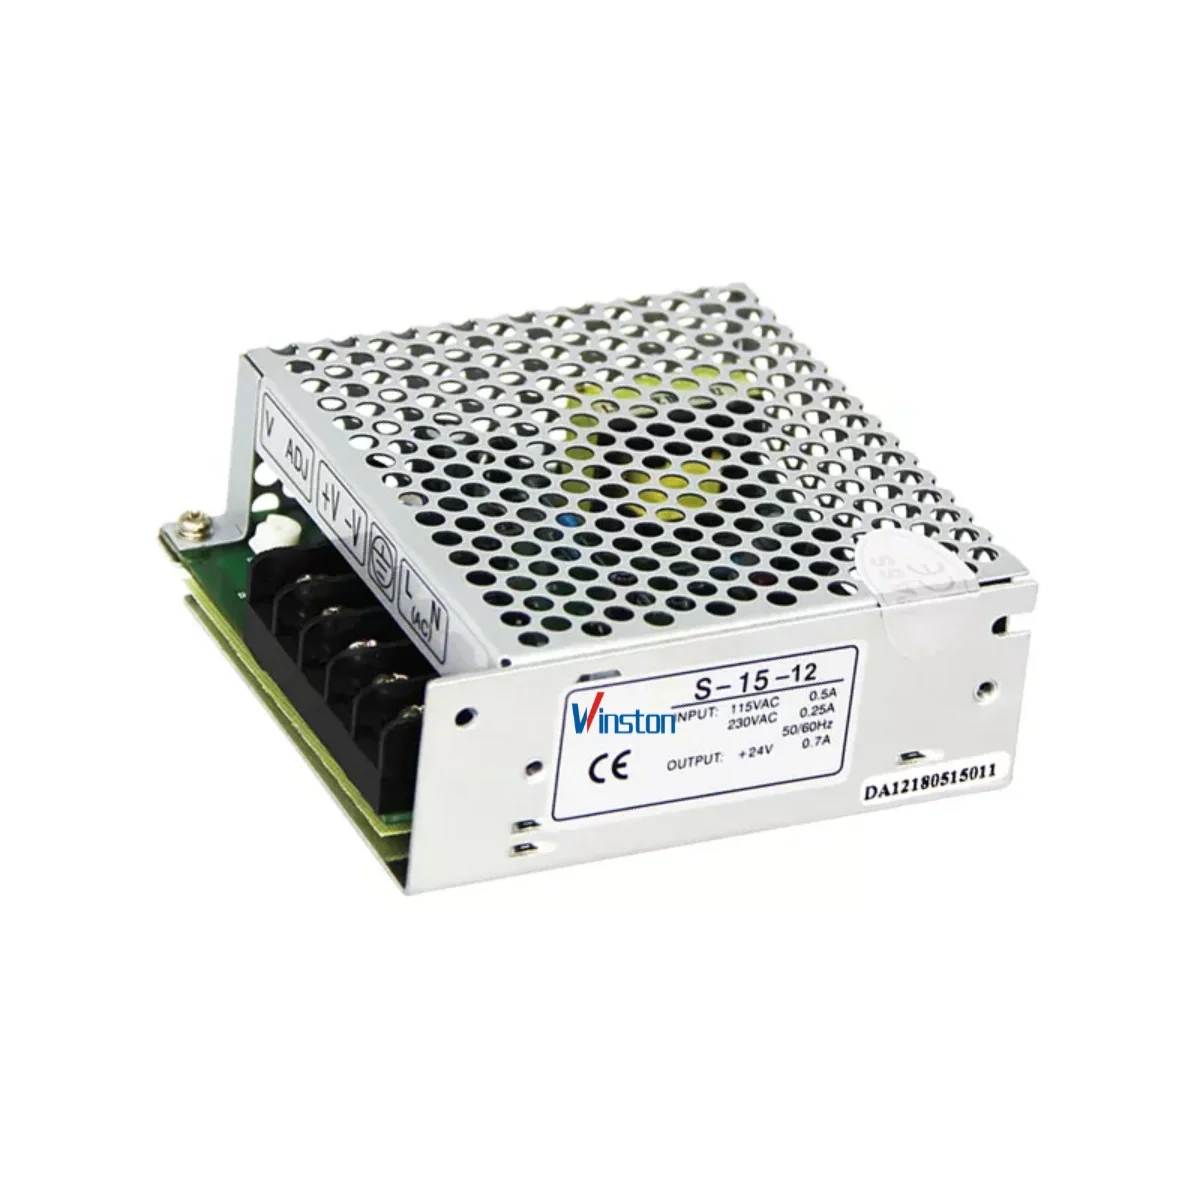 HOT Sale switch power supply led MS-100-24  DC 24v 4.2a 100w from maker MFRS 